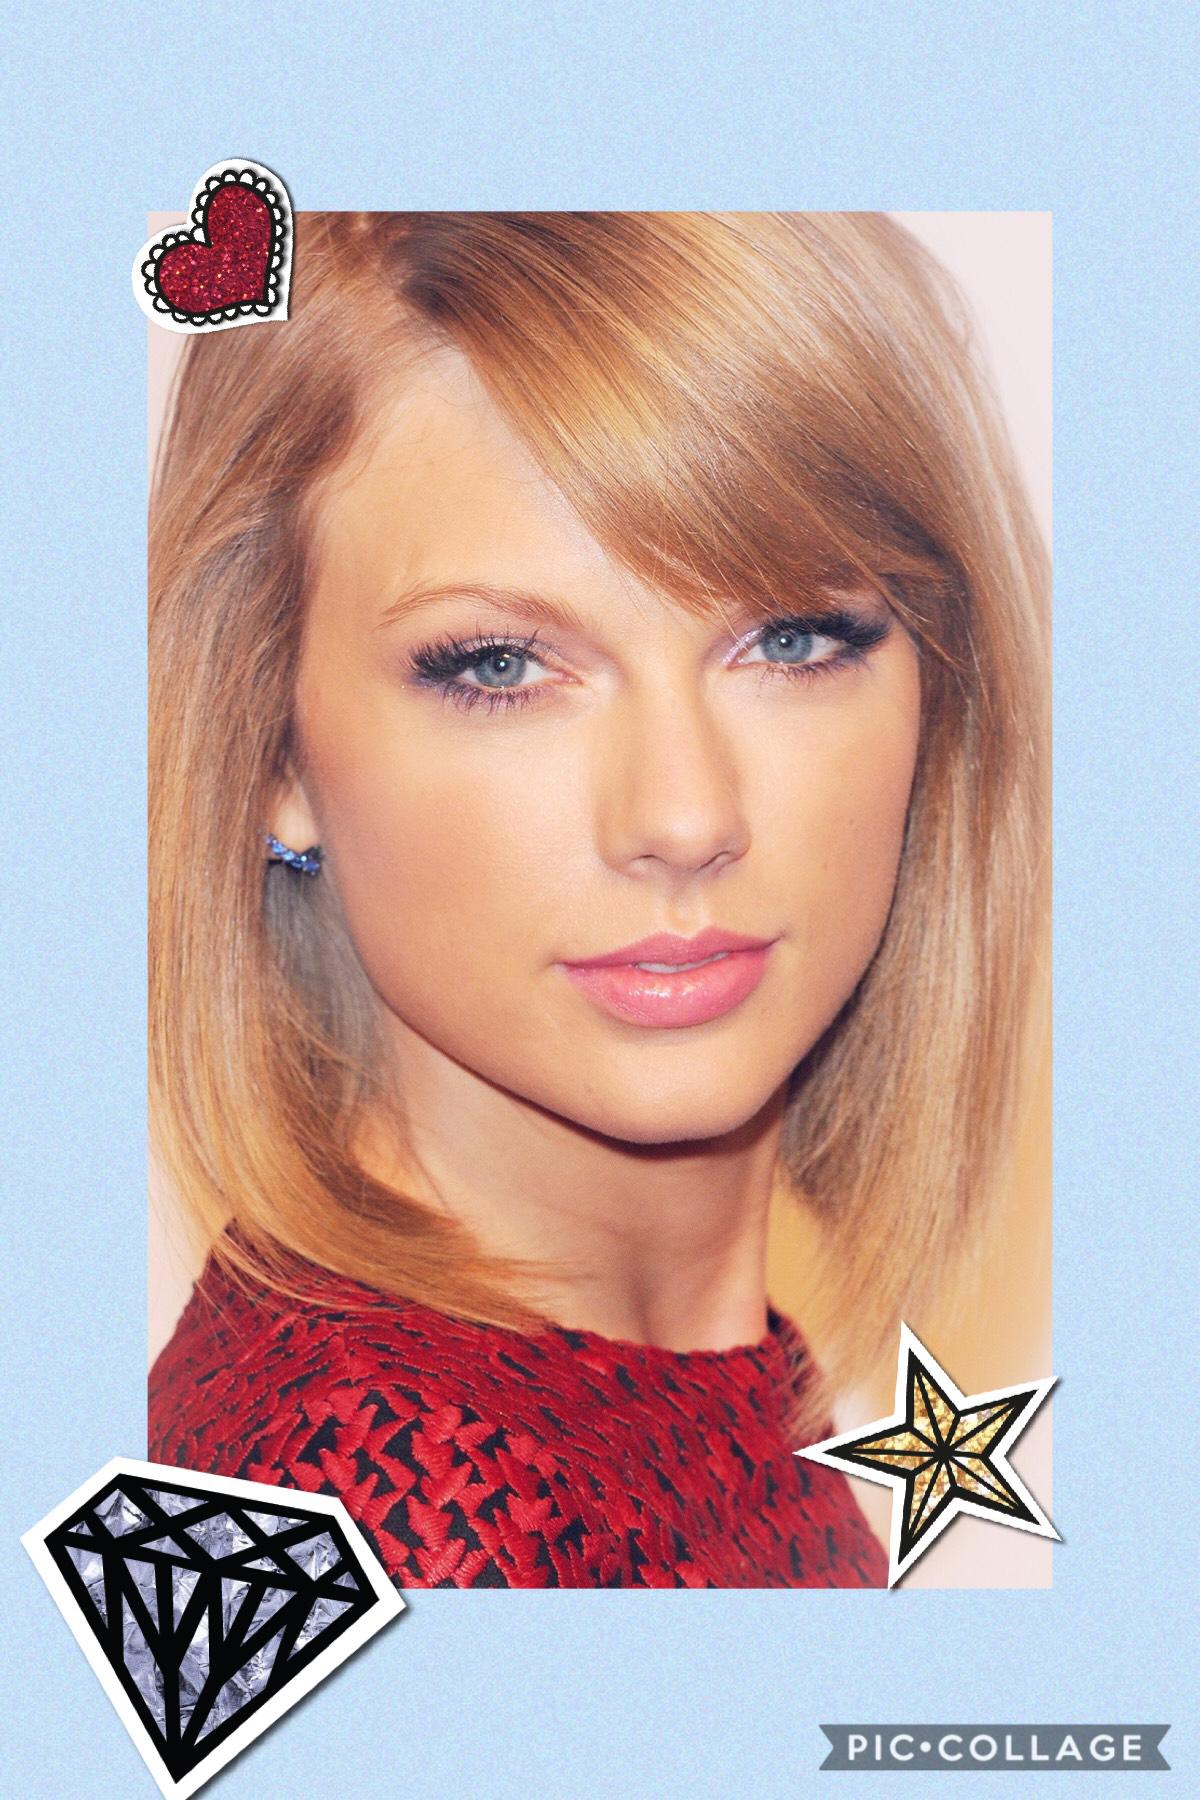  Do you guys like Taylor Swift if you guys do please let me know 